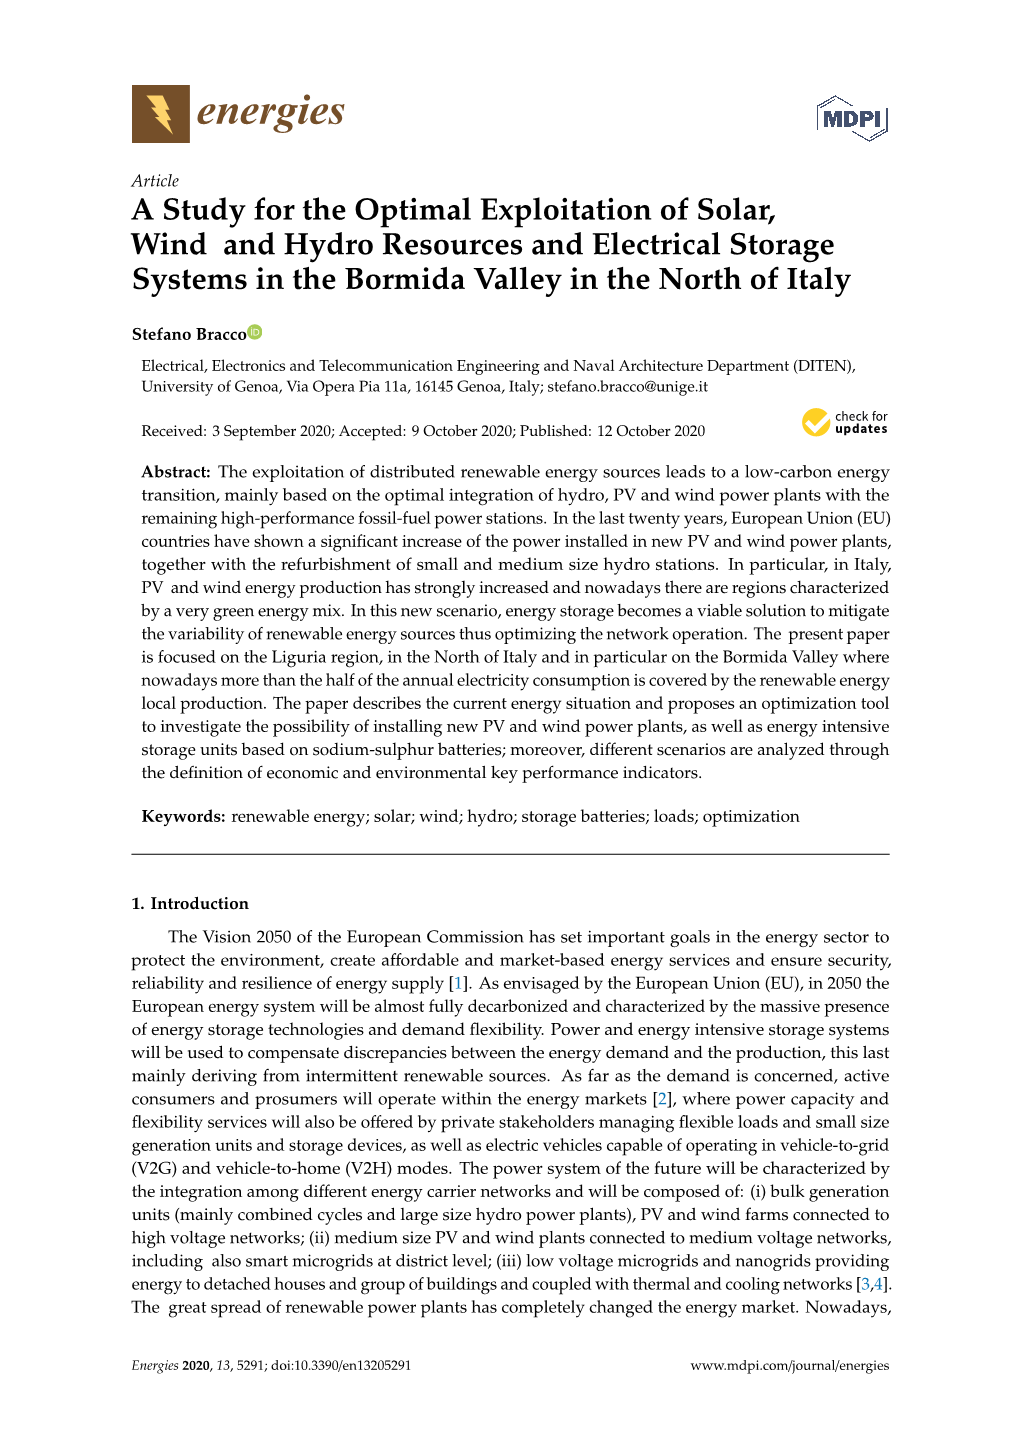 A Study for the Optimal Exploitation of Solar, Wind and Hydro Resources and Electrical Storage Systems in the Bormida Valley in the North of Italy